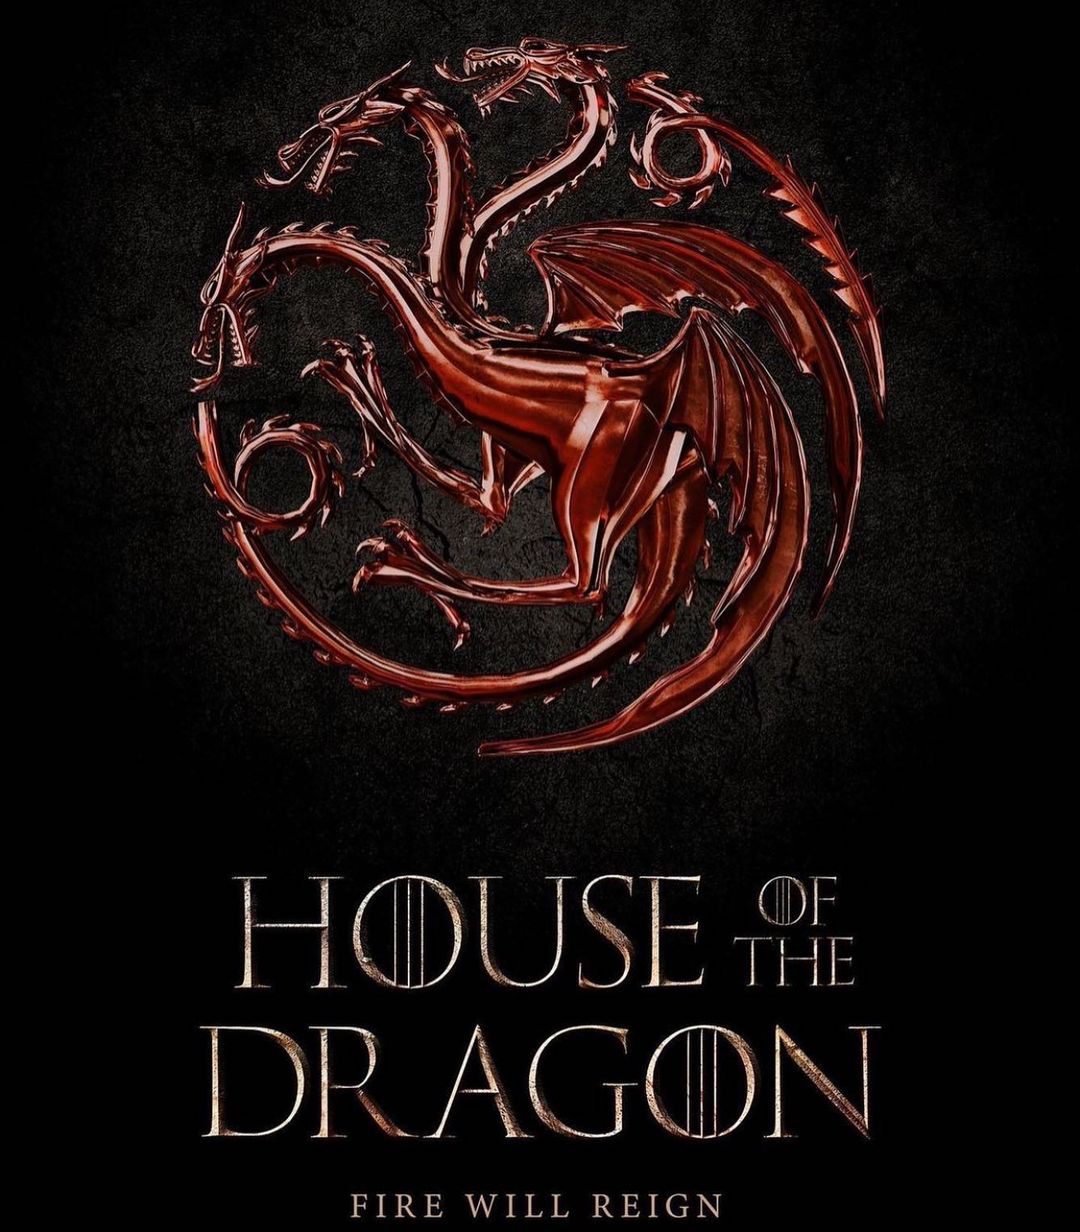 Fans Mourn After House Of The Dragon's Season Finale